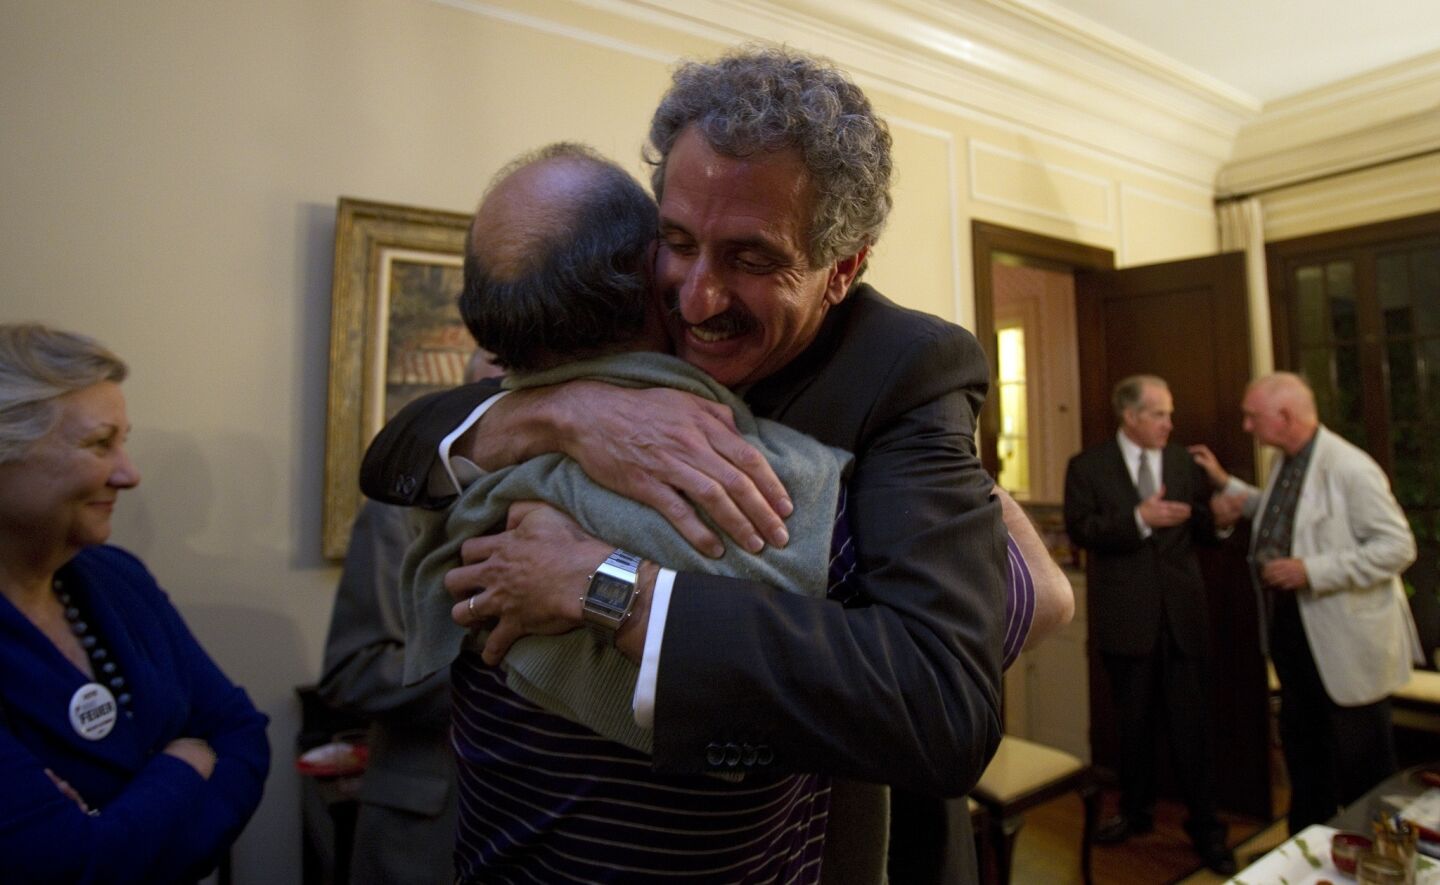 Mike Feuer, right, a candidate for city attorney, gets a hug from his friend Leon Alkalai on election night.